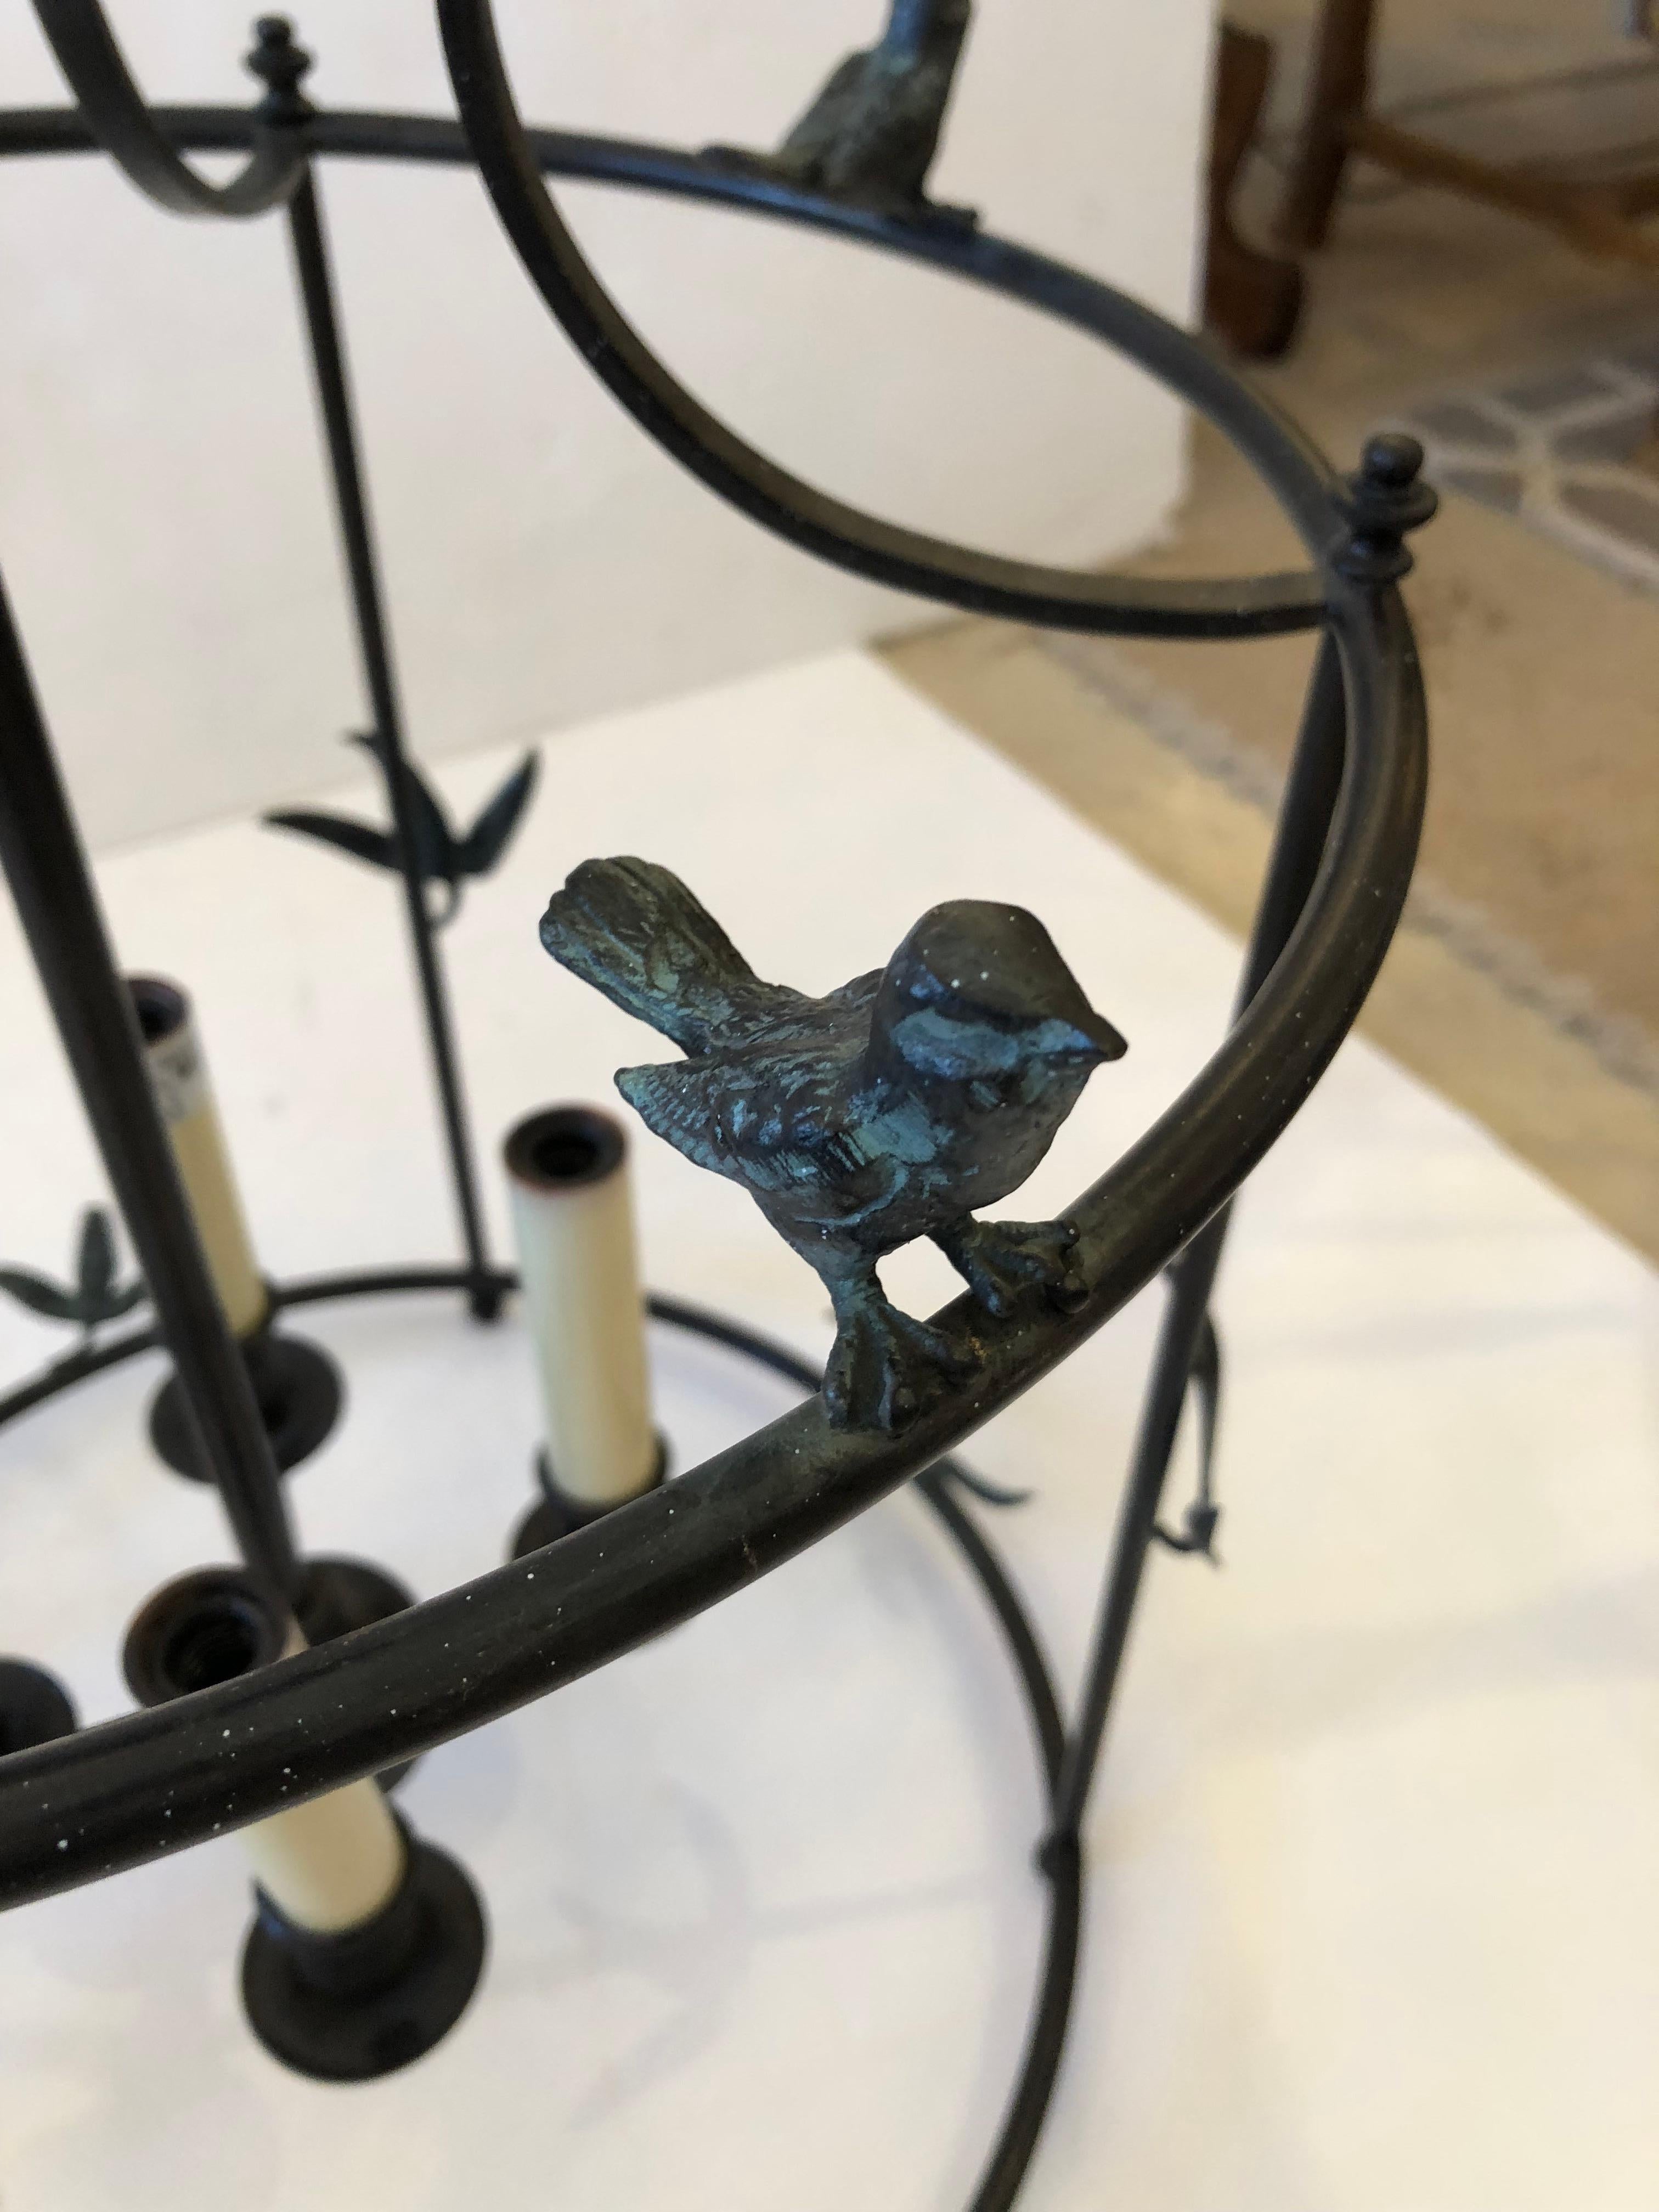 Charming black iron lantern having darling small birds perched around the top periphery and artful flourishes of foliage here and there.  There are four interior candle arms, 5 ft of chain and ceiling cap included.

NOTE:  Pair is available for $3900